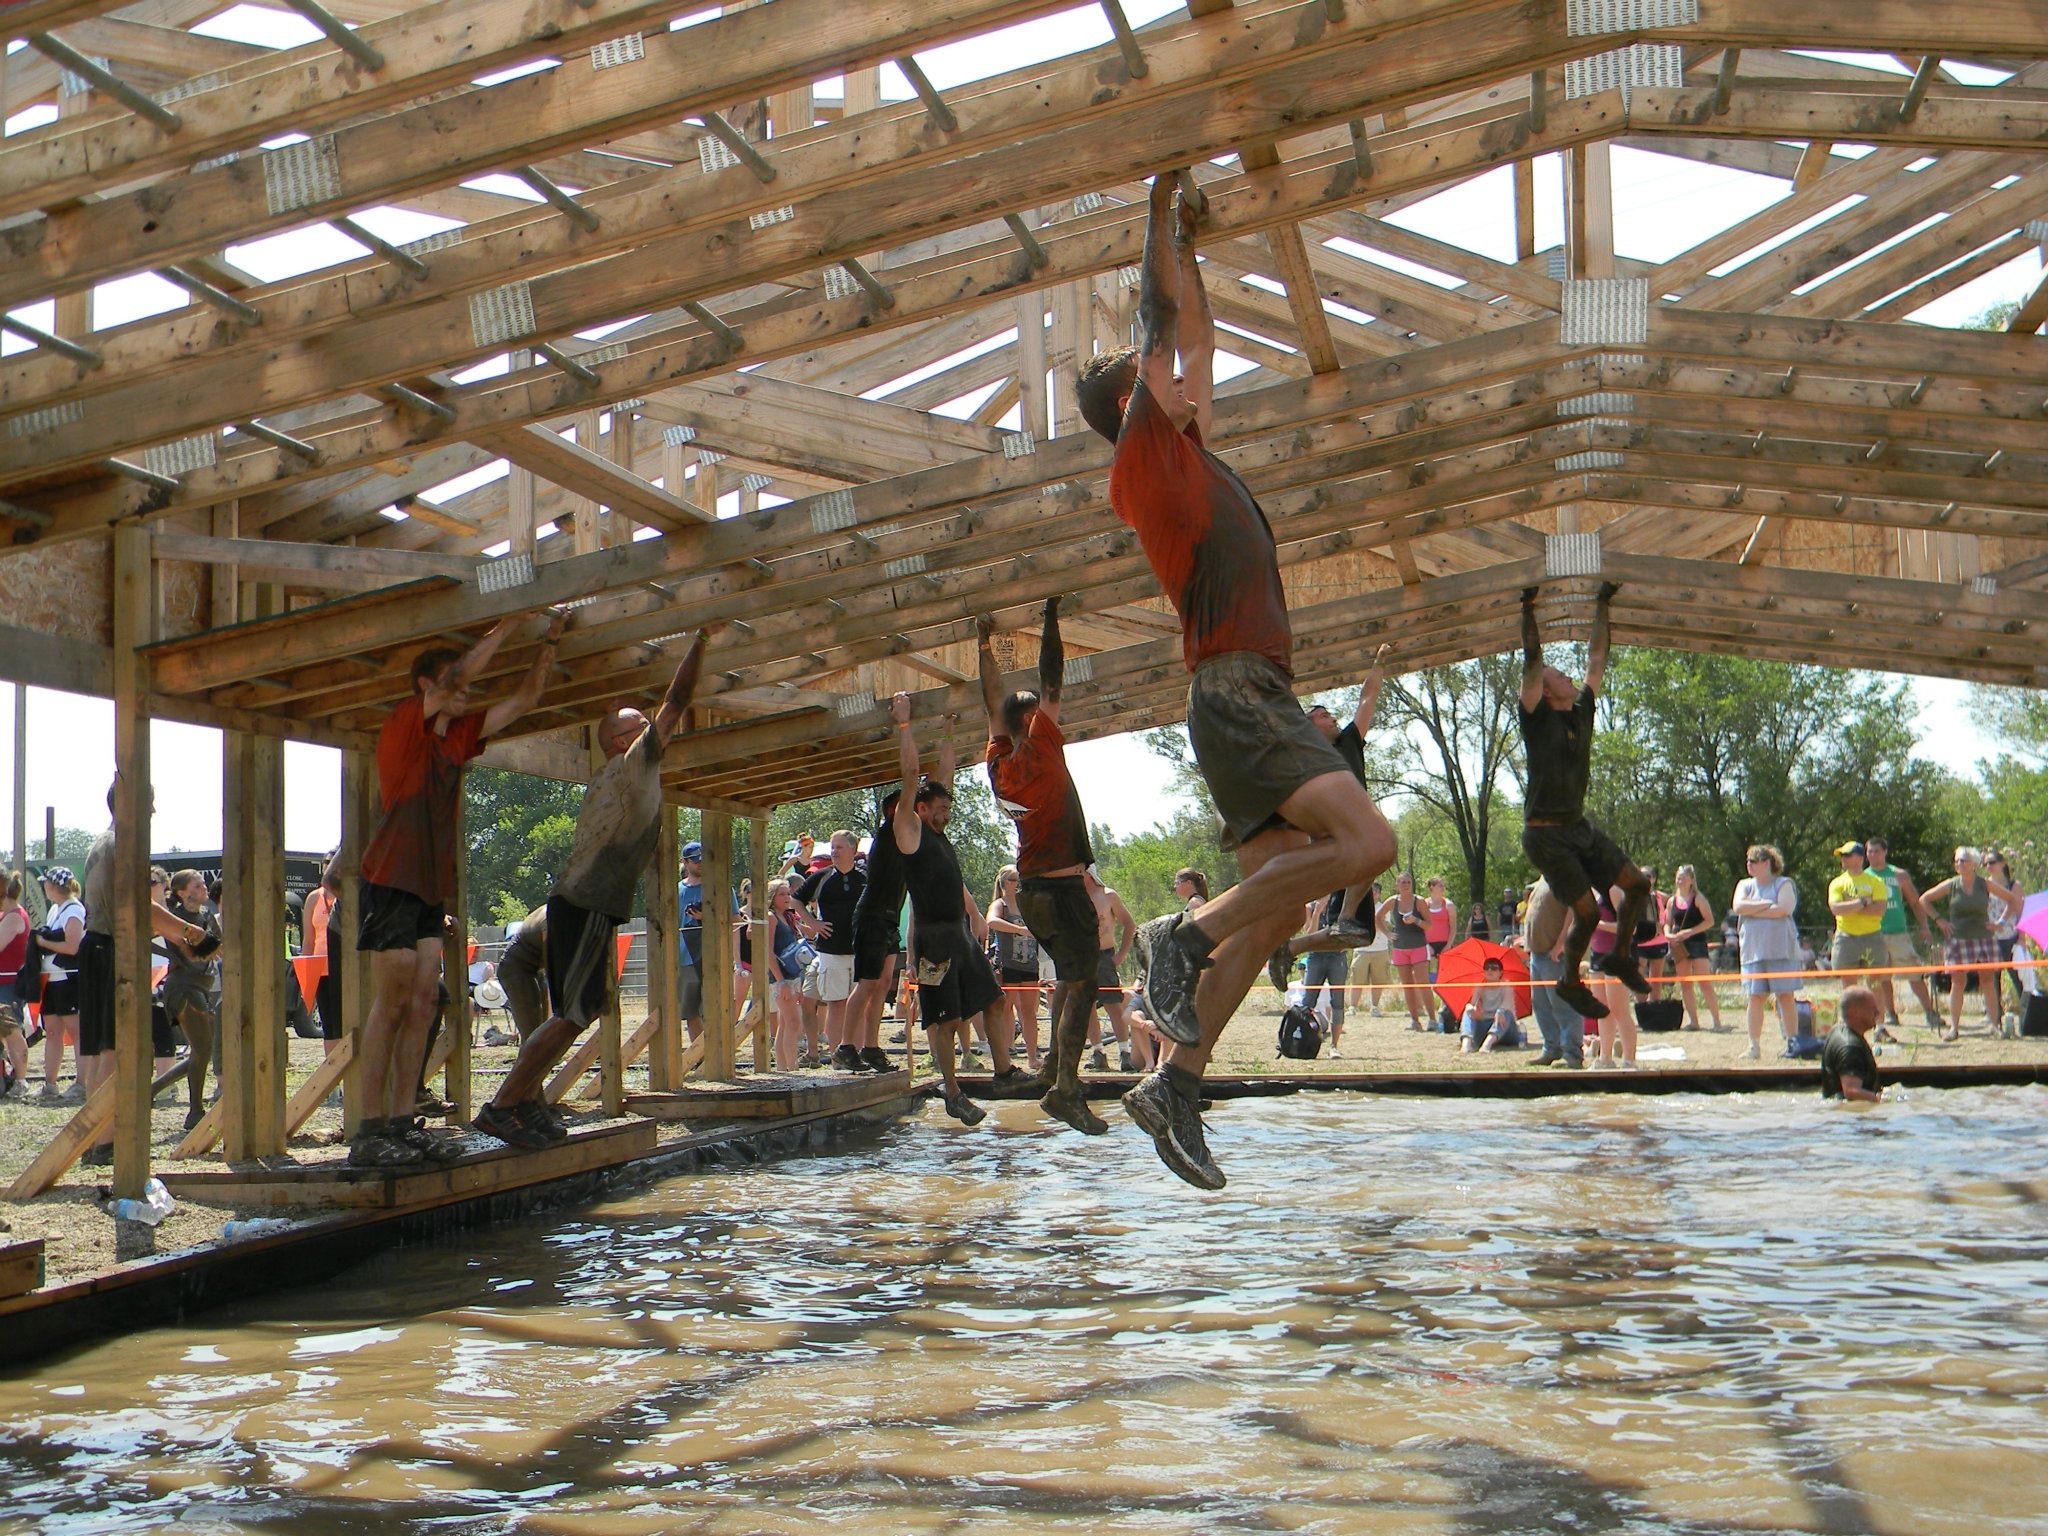 Monkey bars over water obstacle.